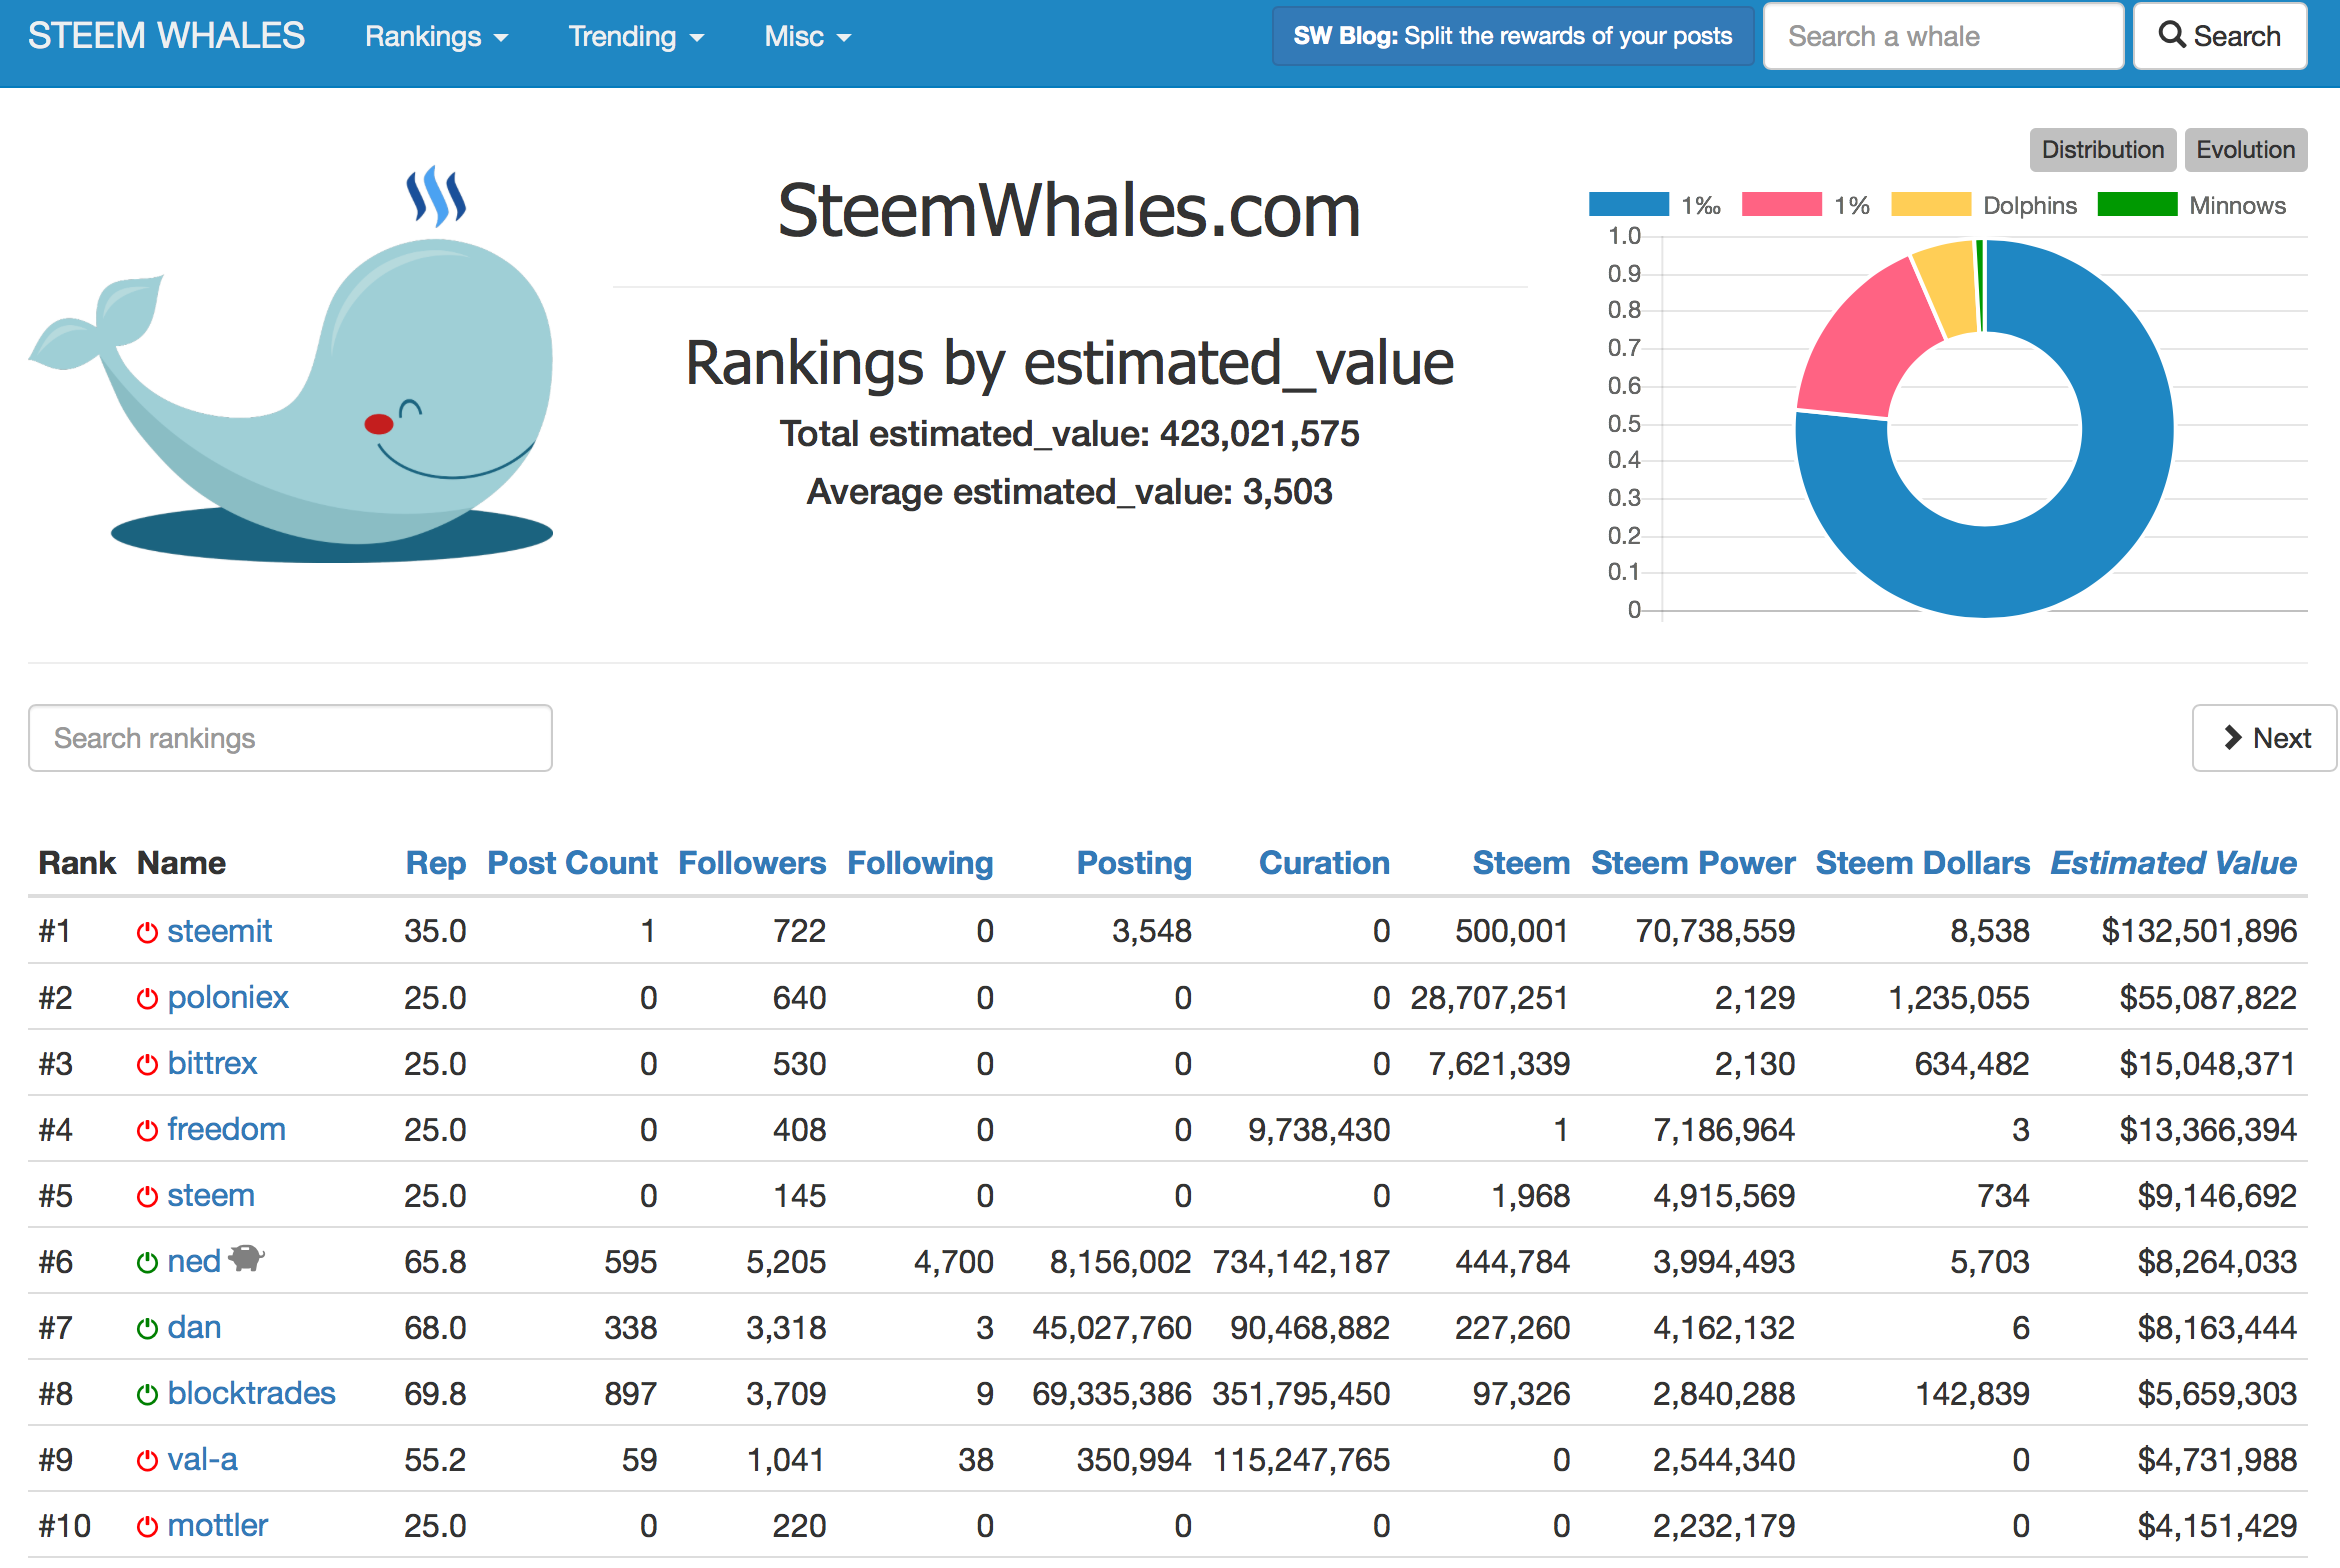 SteemWhales_com_-_Rankings_and_statistics_for_STEEM.png